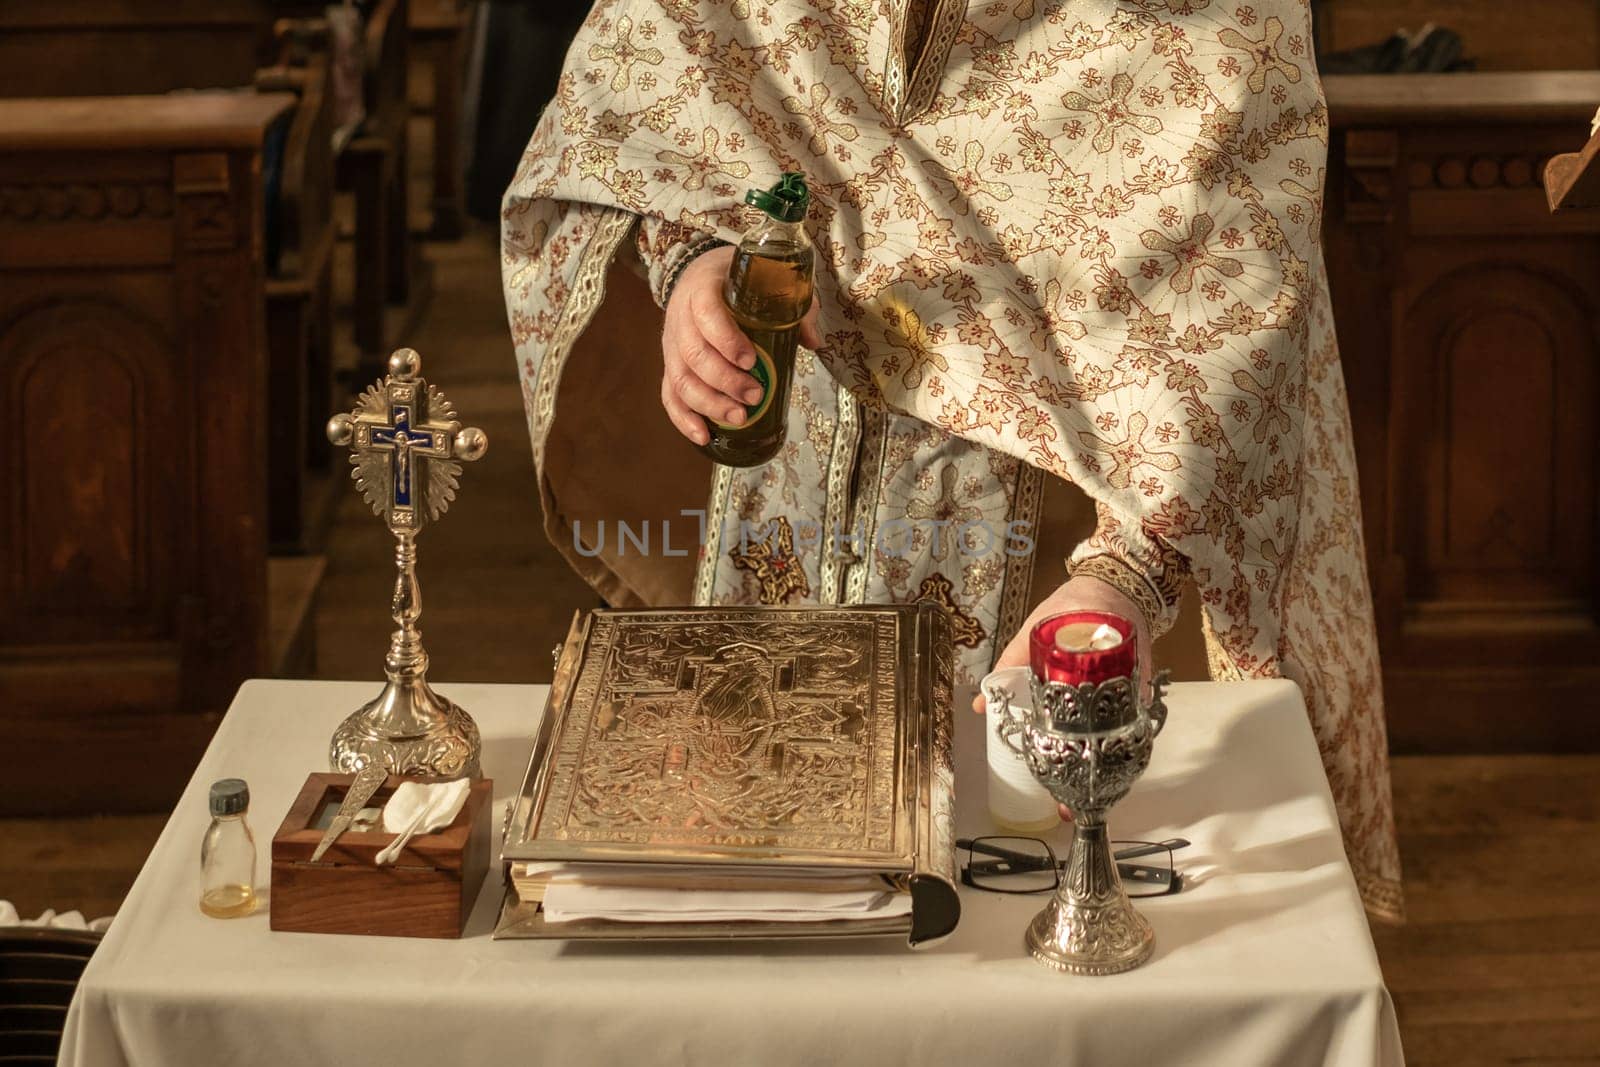 A priest in a cassock prepares oil for a child's baptism